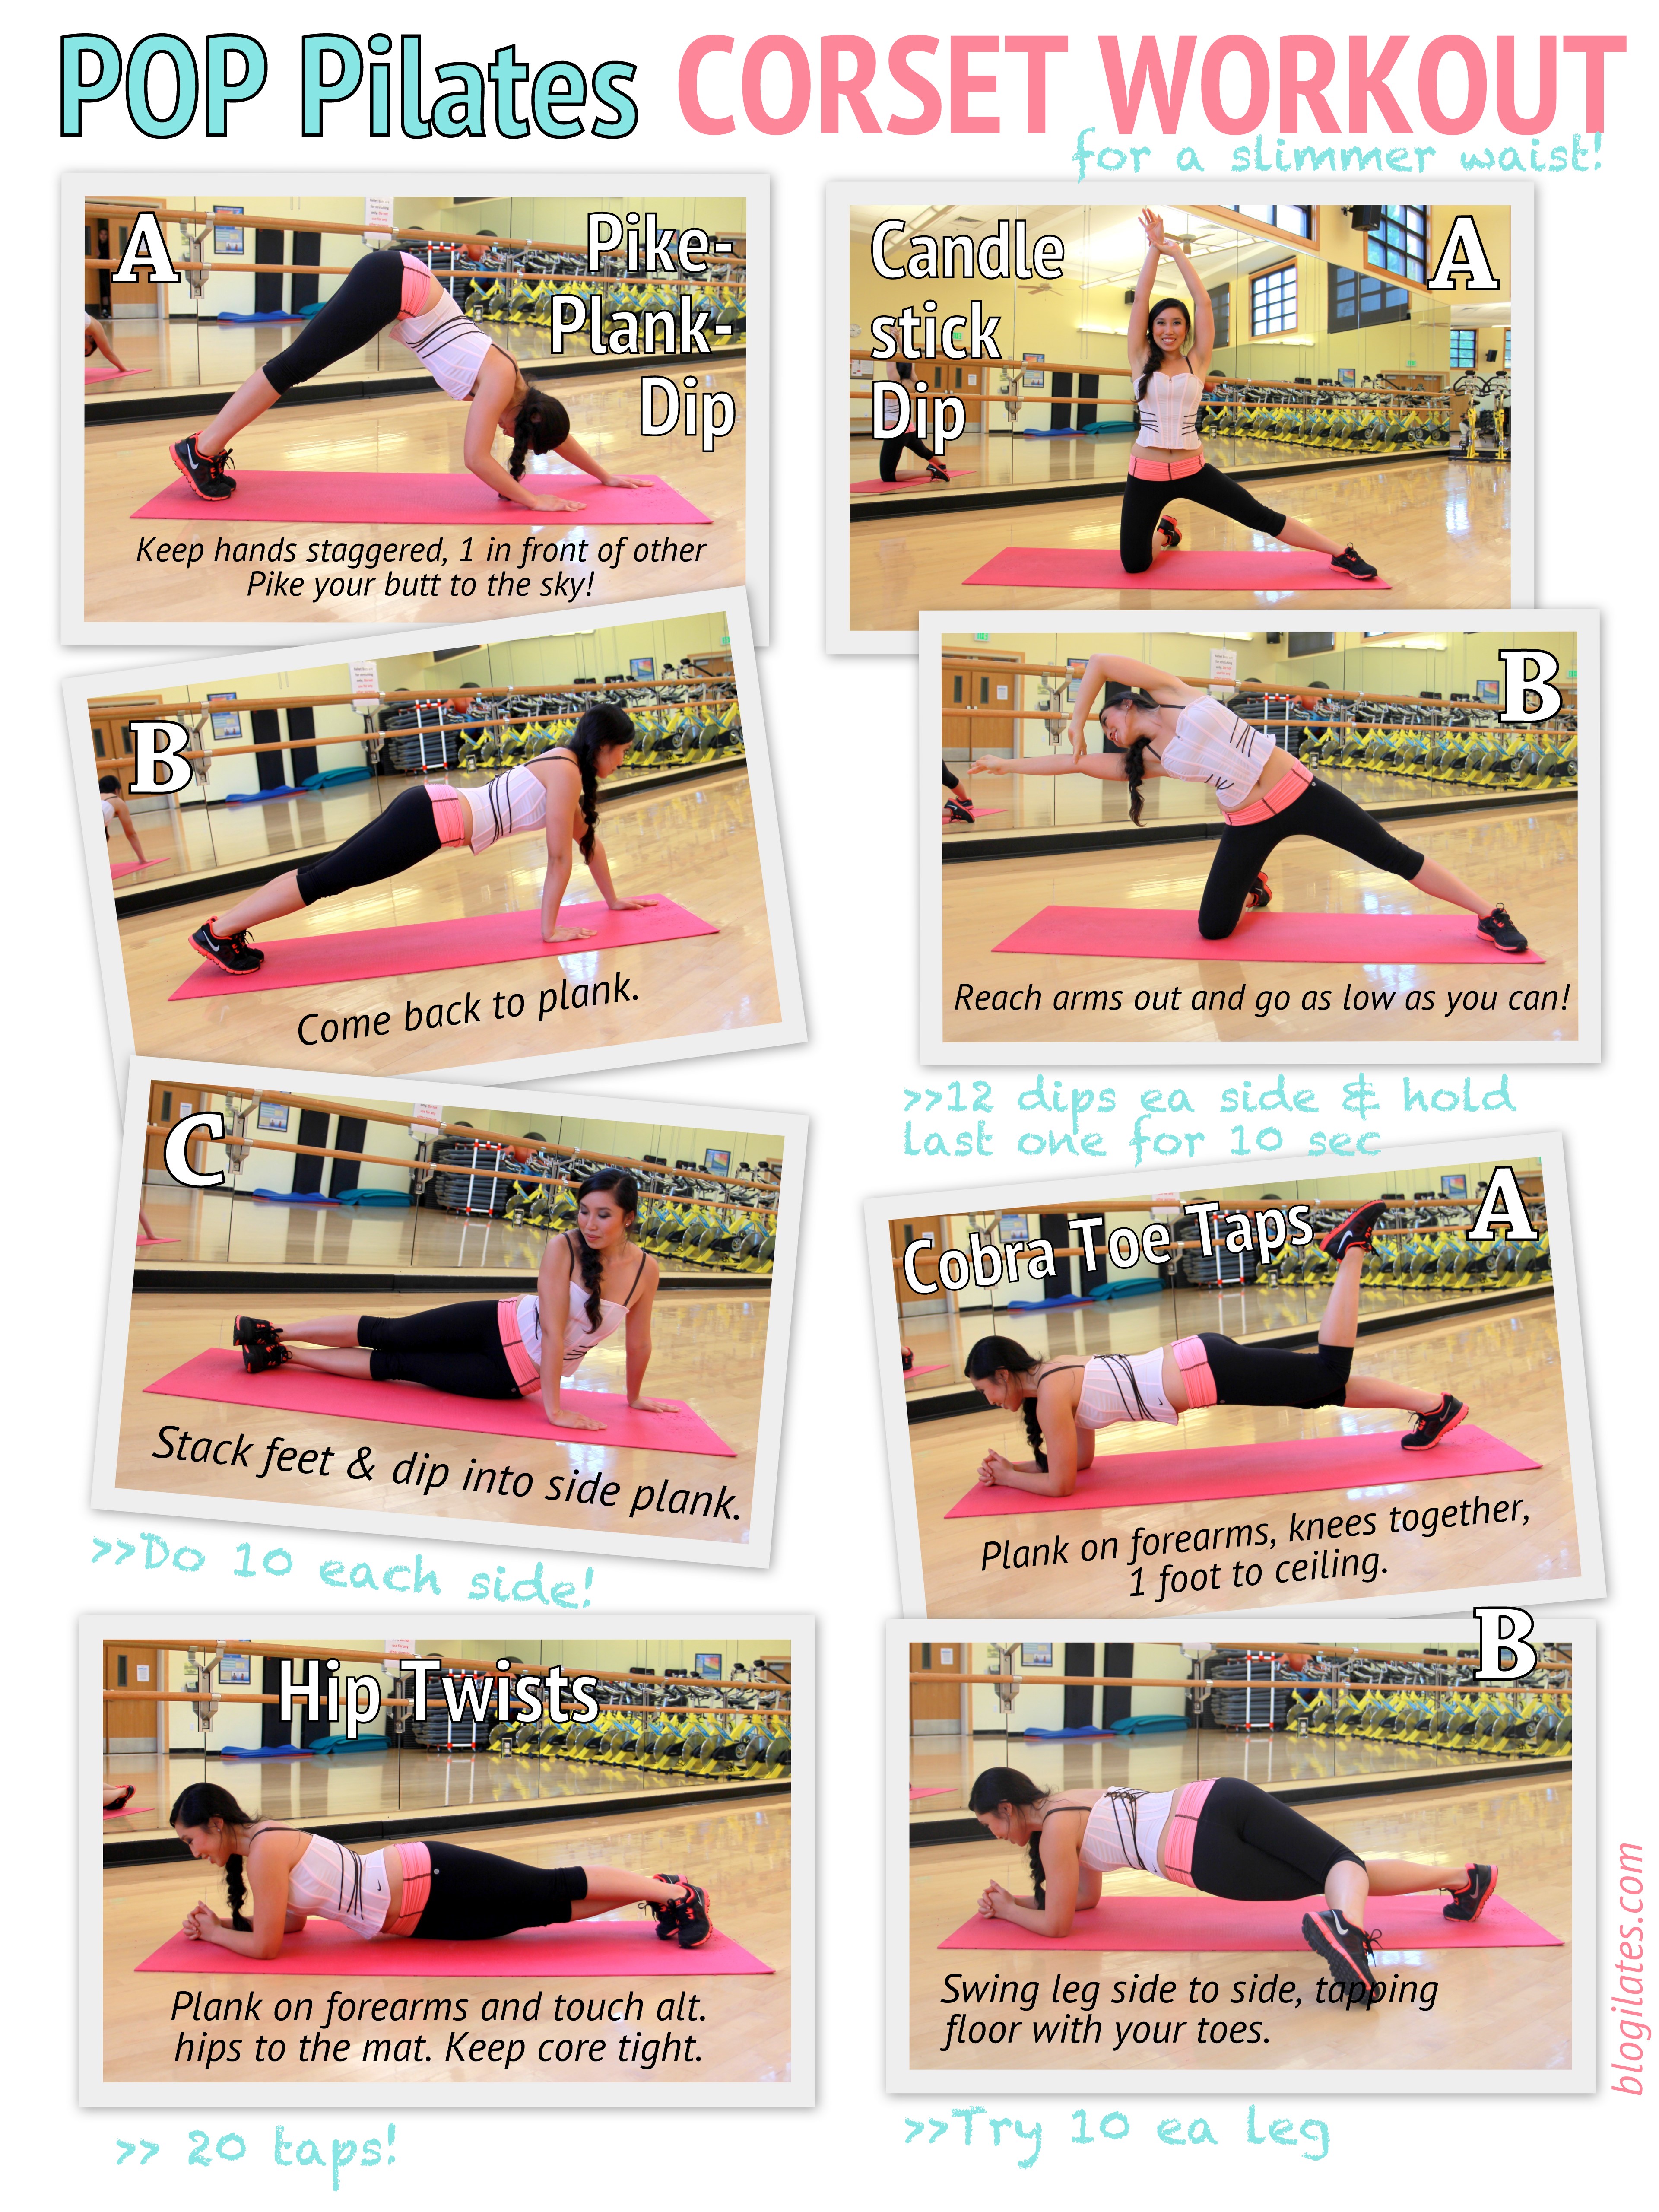 POP Pilates: CORSET WORKOUT Printable is here! - Blogilates